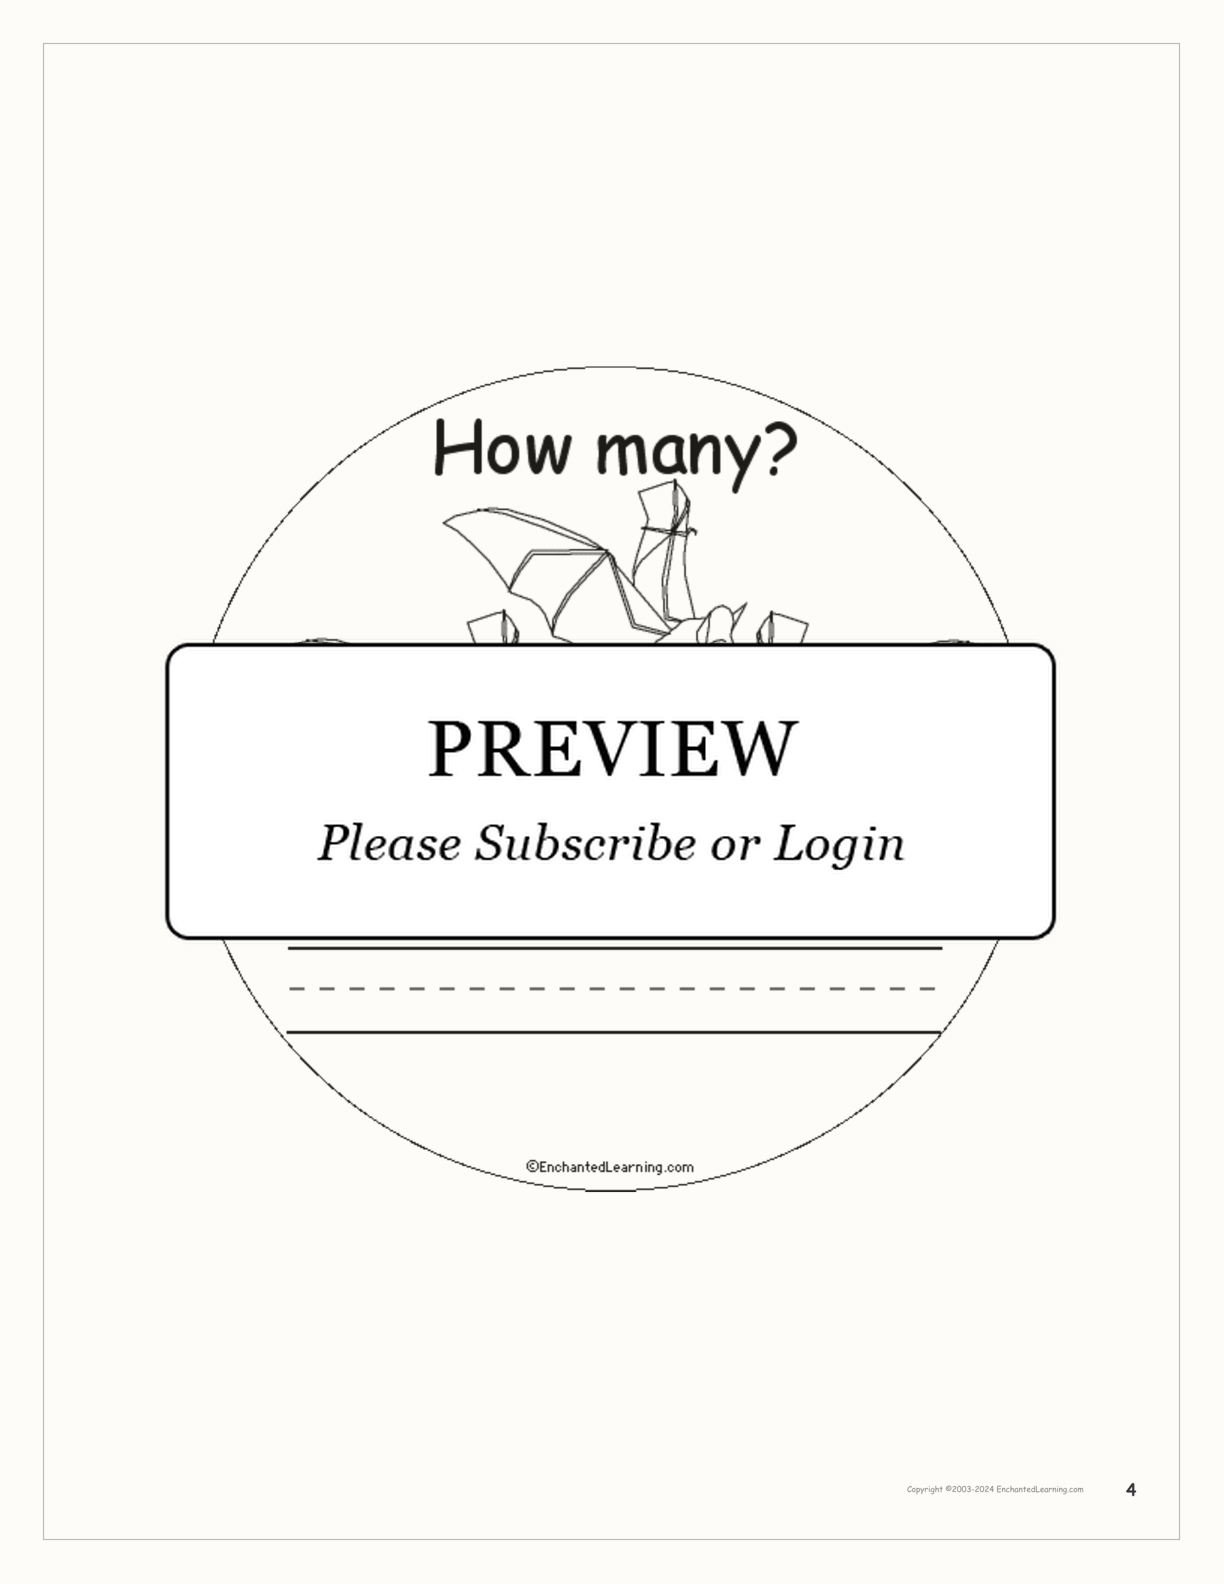 How Many Bats? Book for Early Readers interactive printout page 4